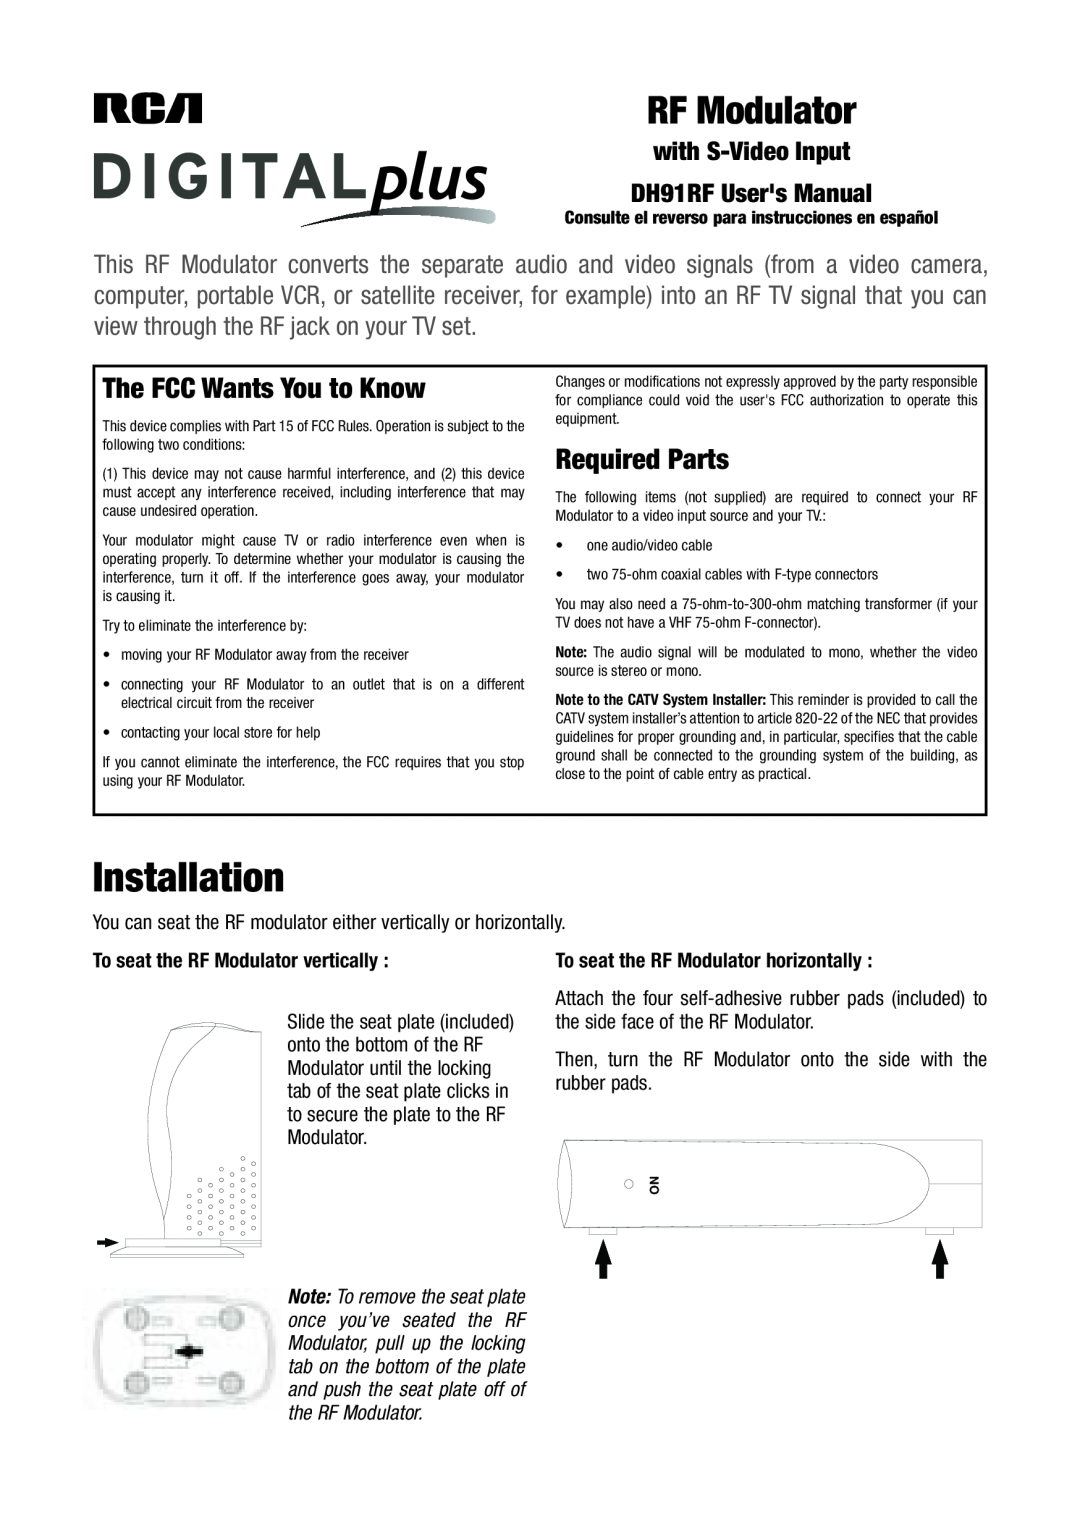 RCA DH91RF user manual Installation, RF Modulator, Required Parts, The FCC Wants You to Know 